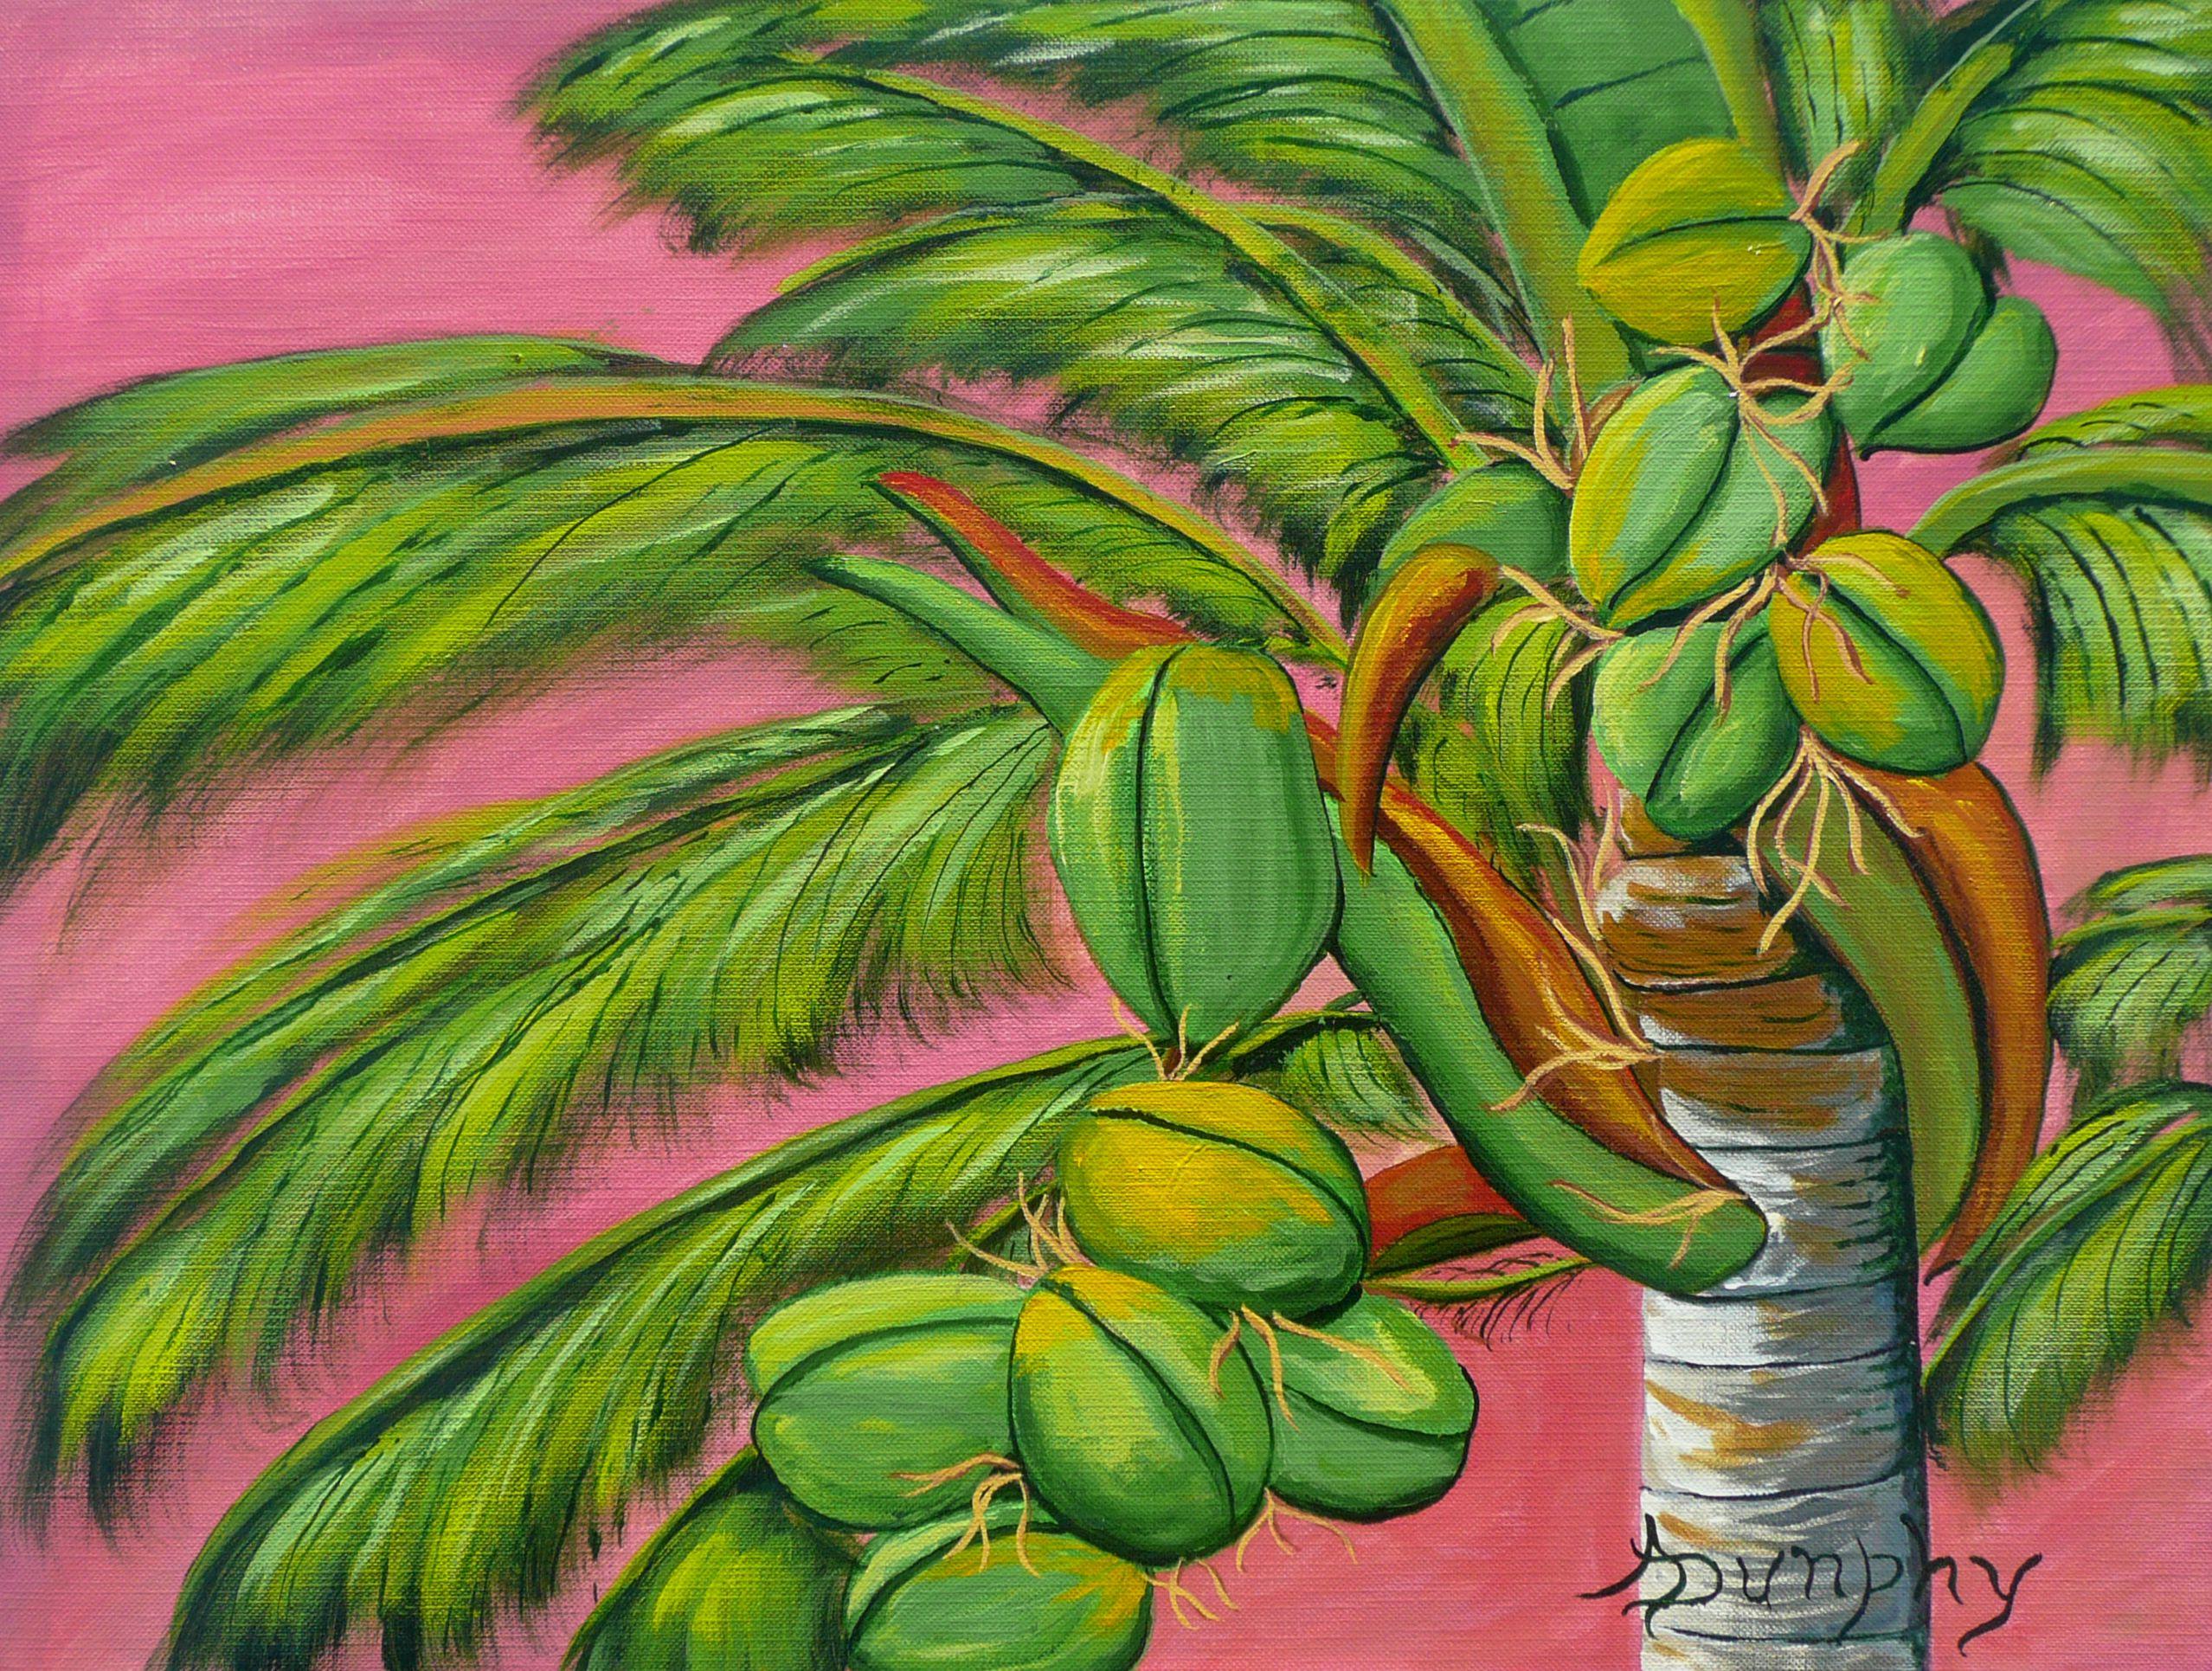 I recently visited Hawaii again and took many great reference shots and have been making a Hawaii series. This painting is number three. This brilliant pink sunset sky was a wonderful backdrop to the swaying palm trees filled with their coconuts.   